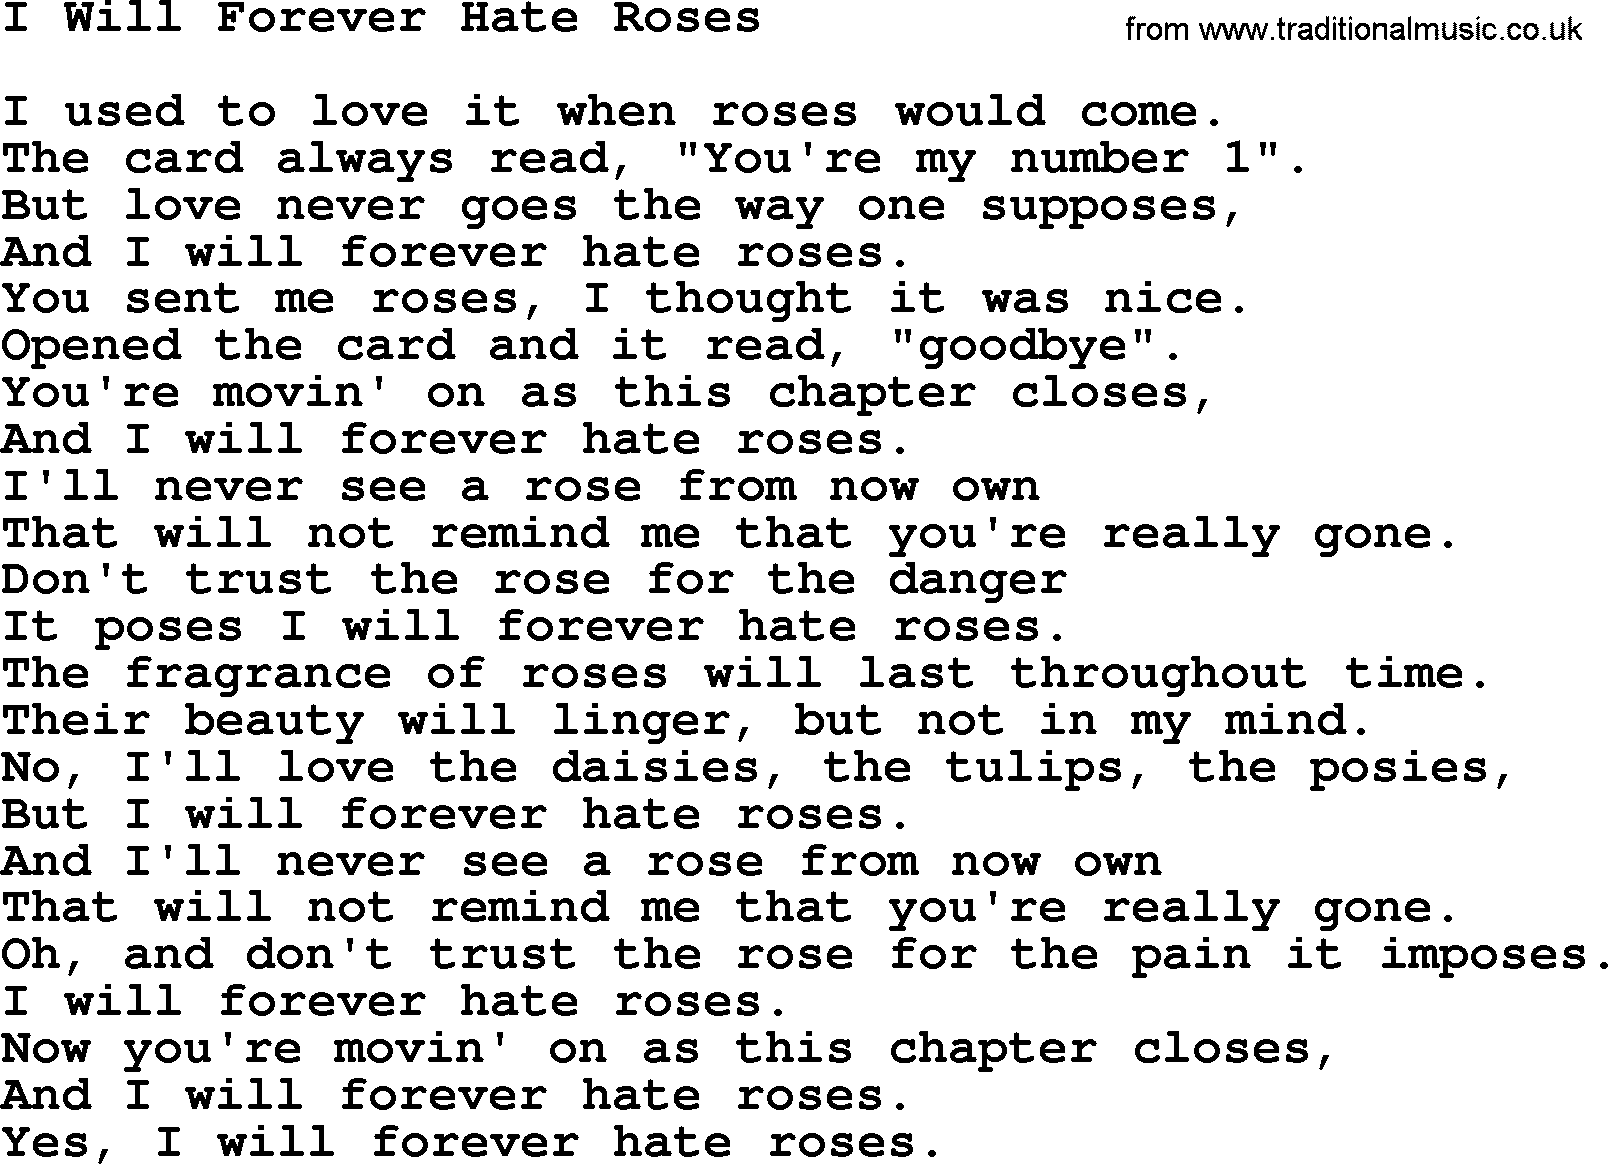 Dolly Parton song I Will Forever Hate Roses.txt lyrics